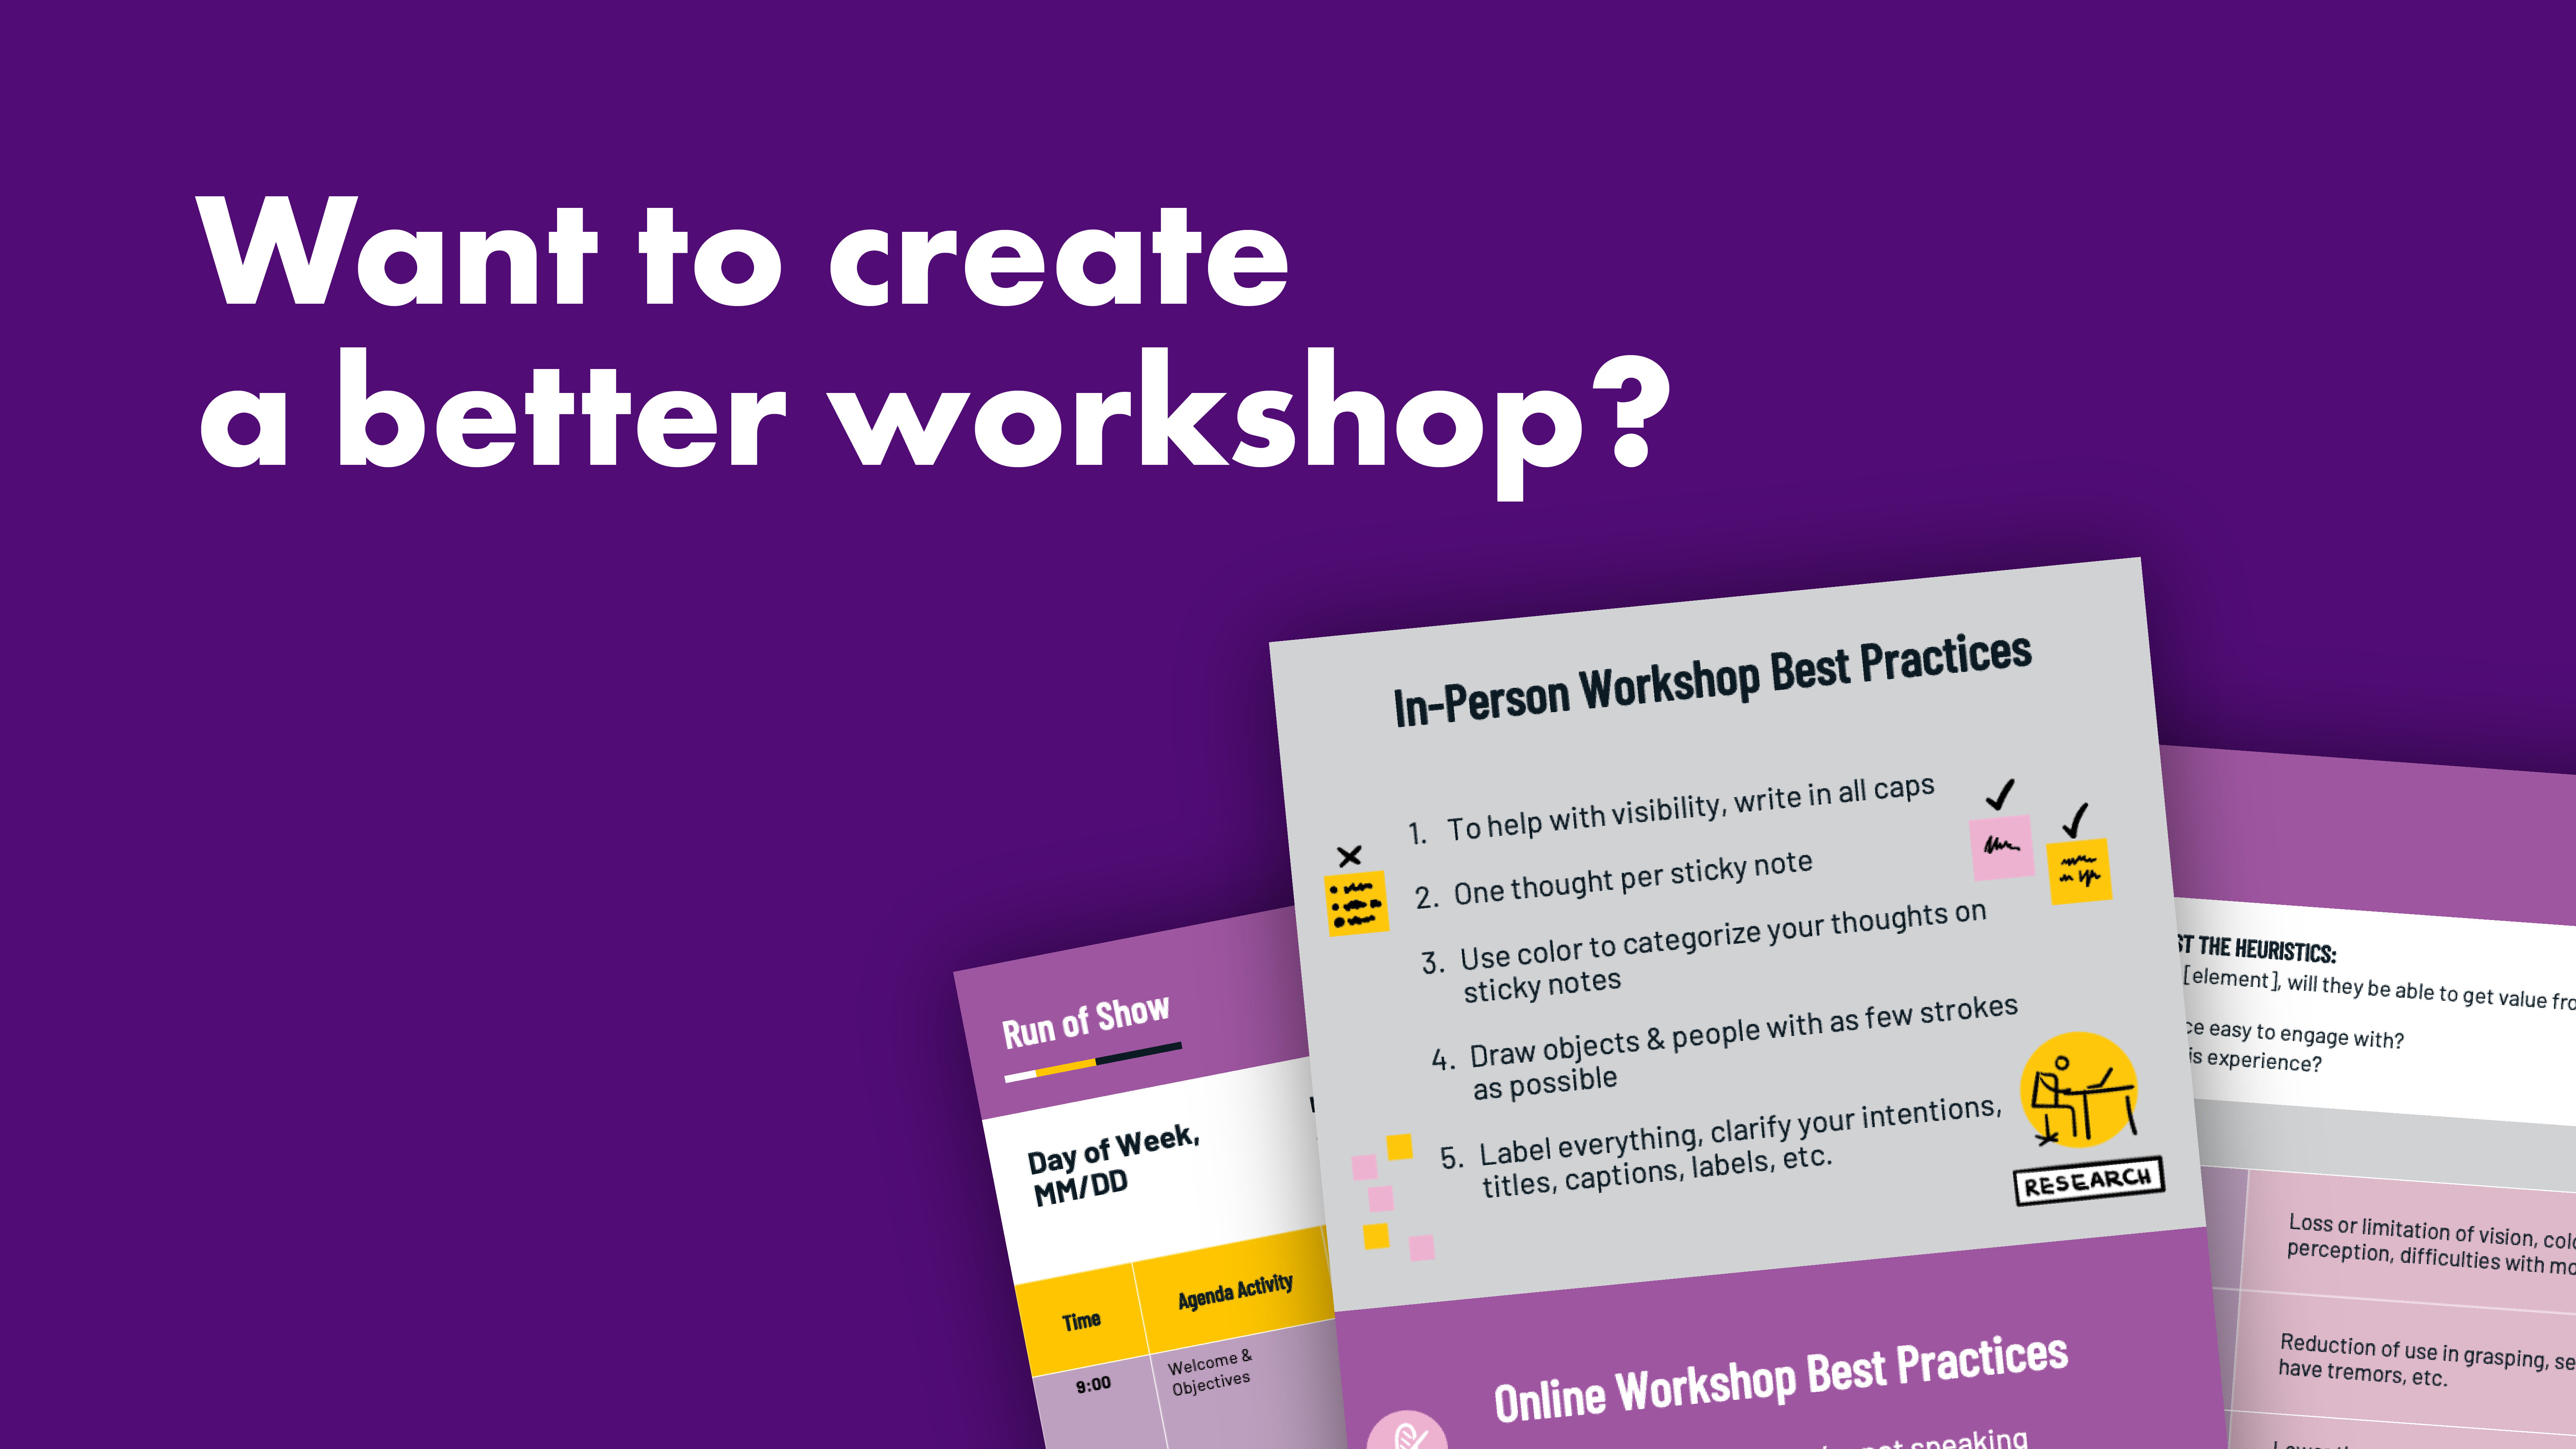 Text reading "Want to create a better workshop?" This is besides three sample slide templates available for download.